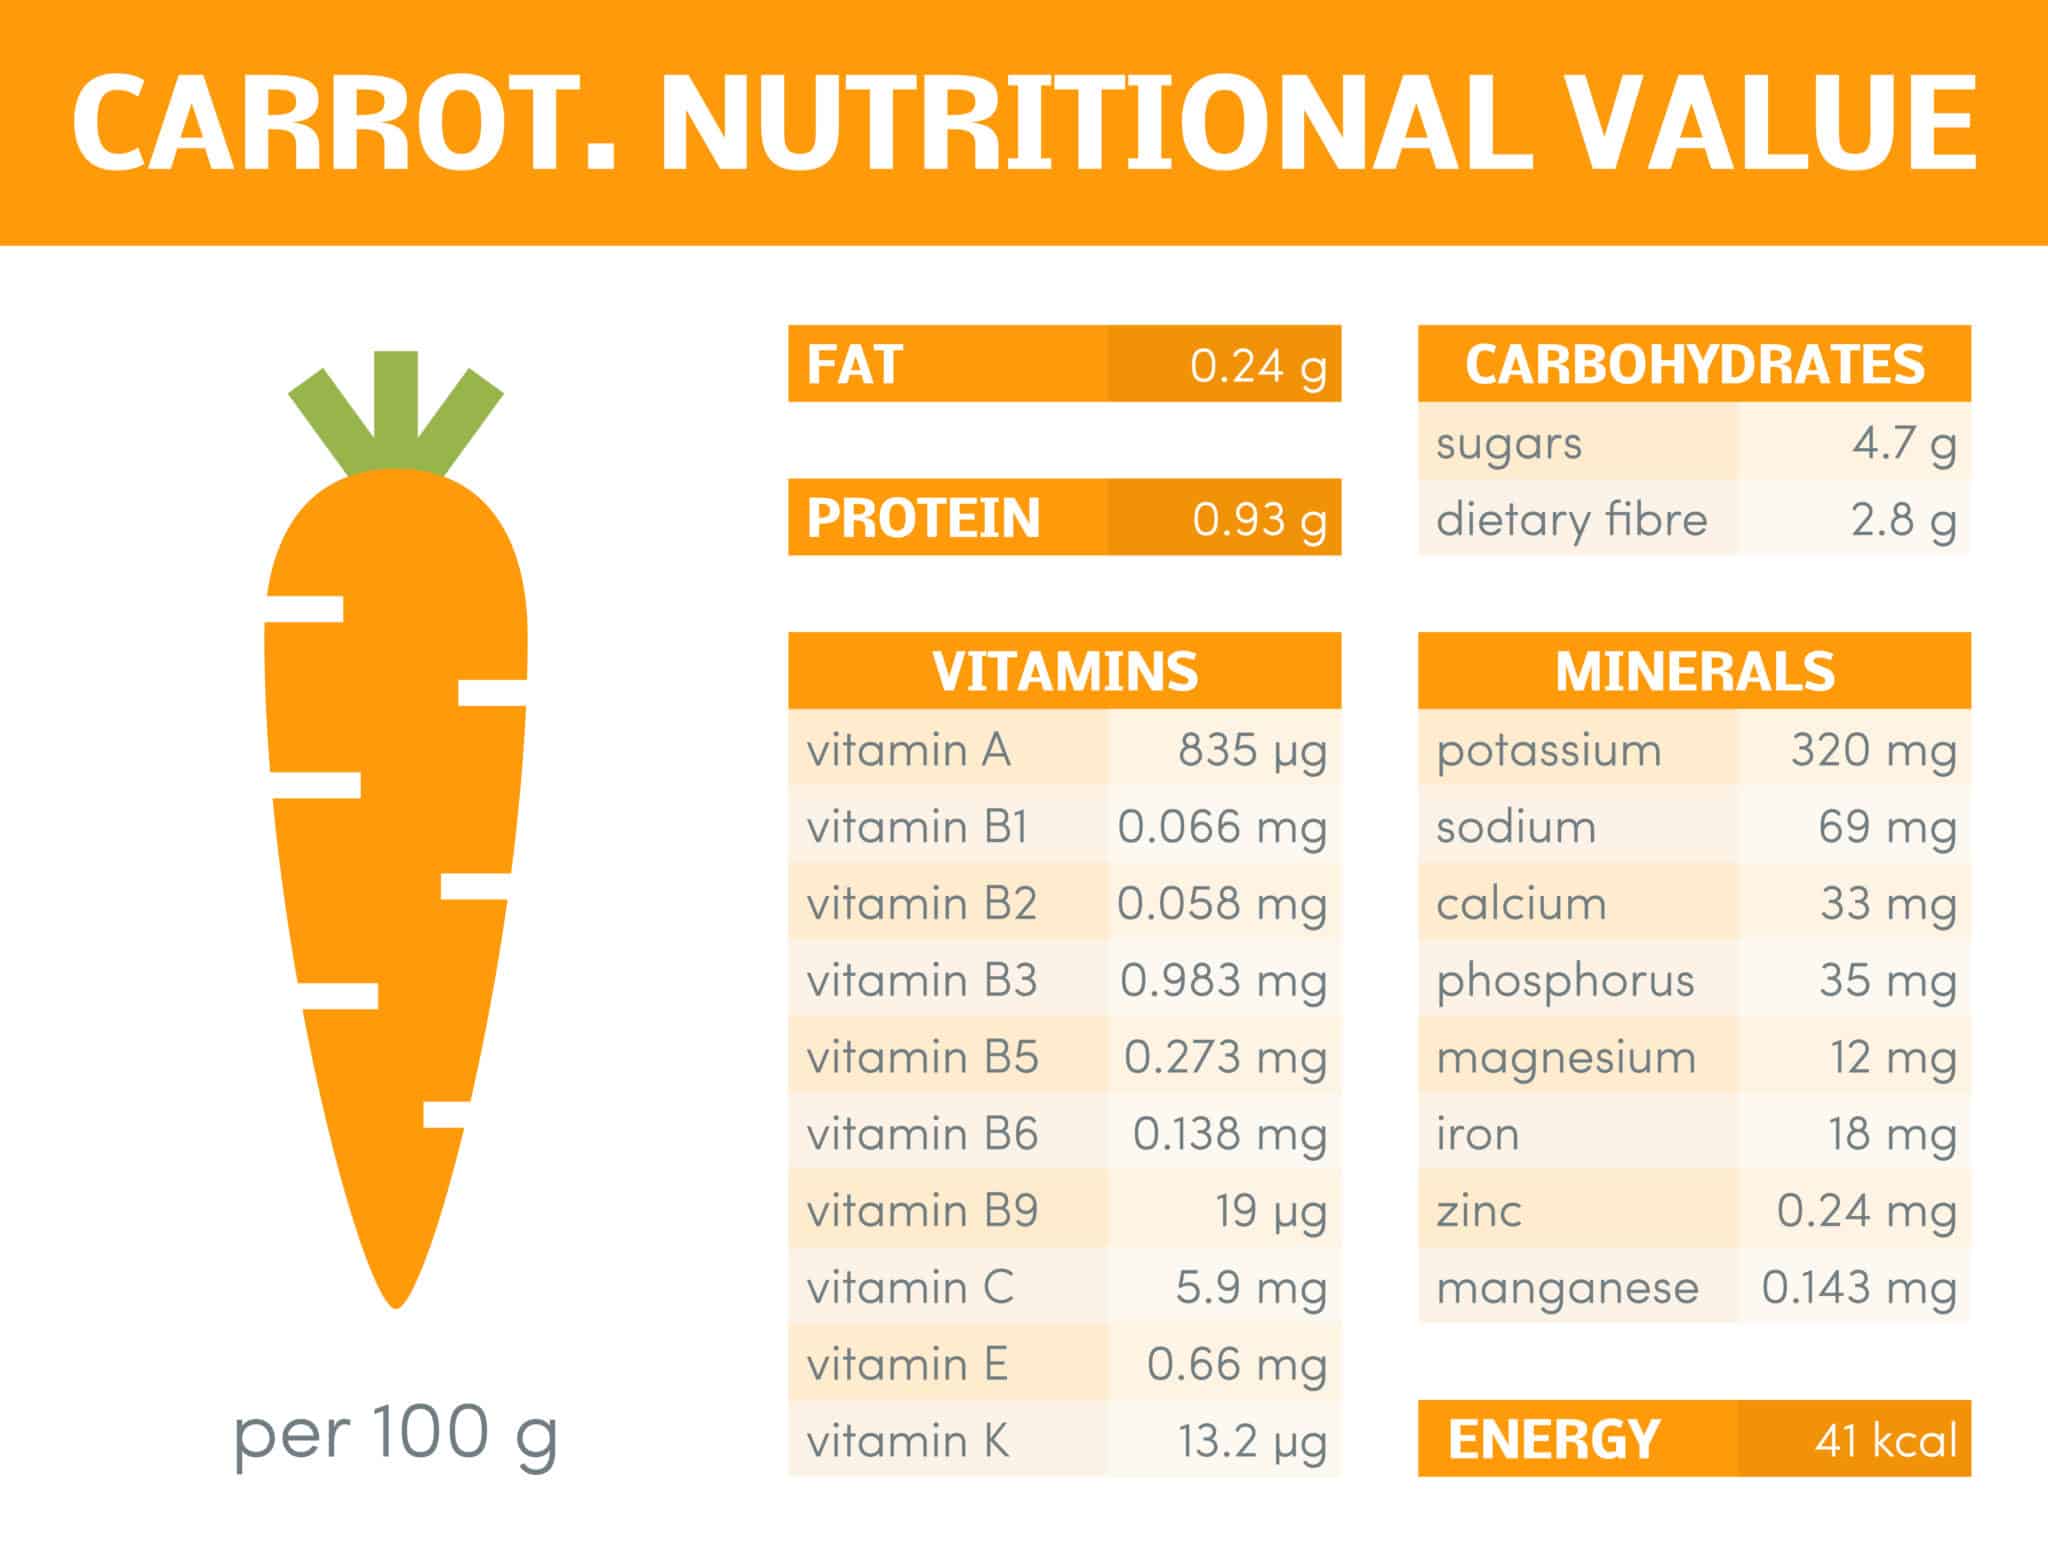 Nutrition facts graphic for carrots